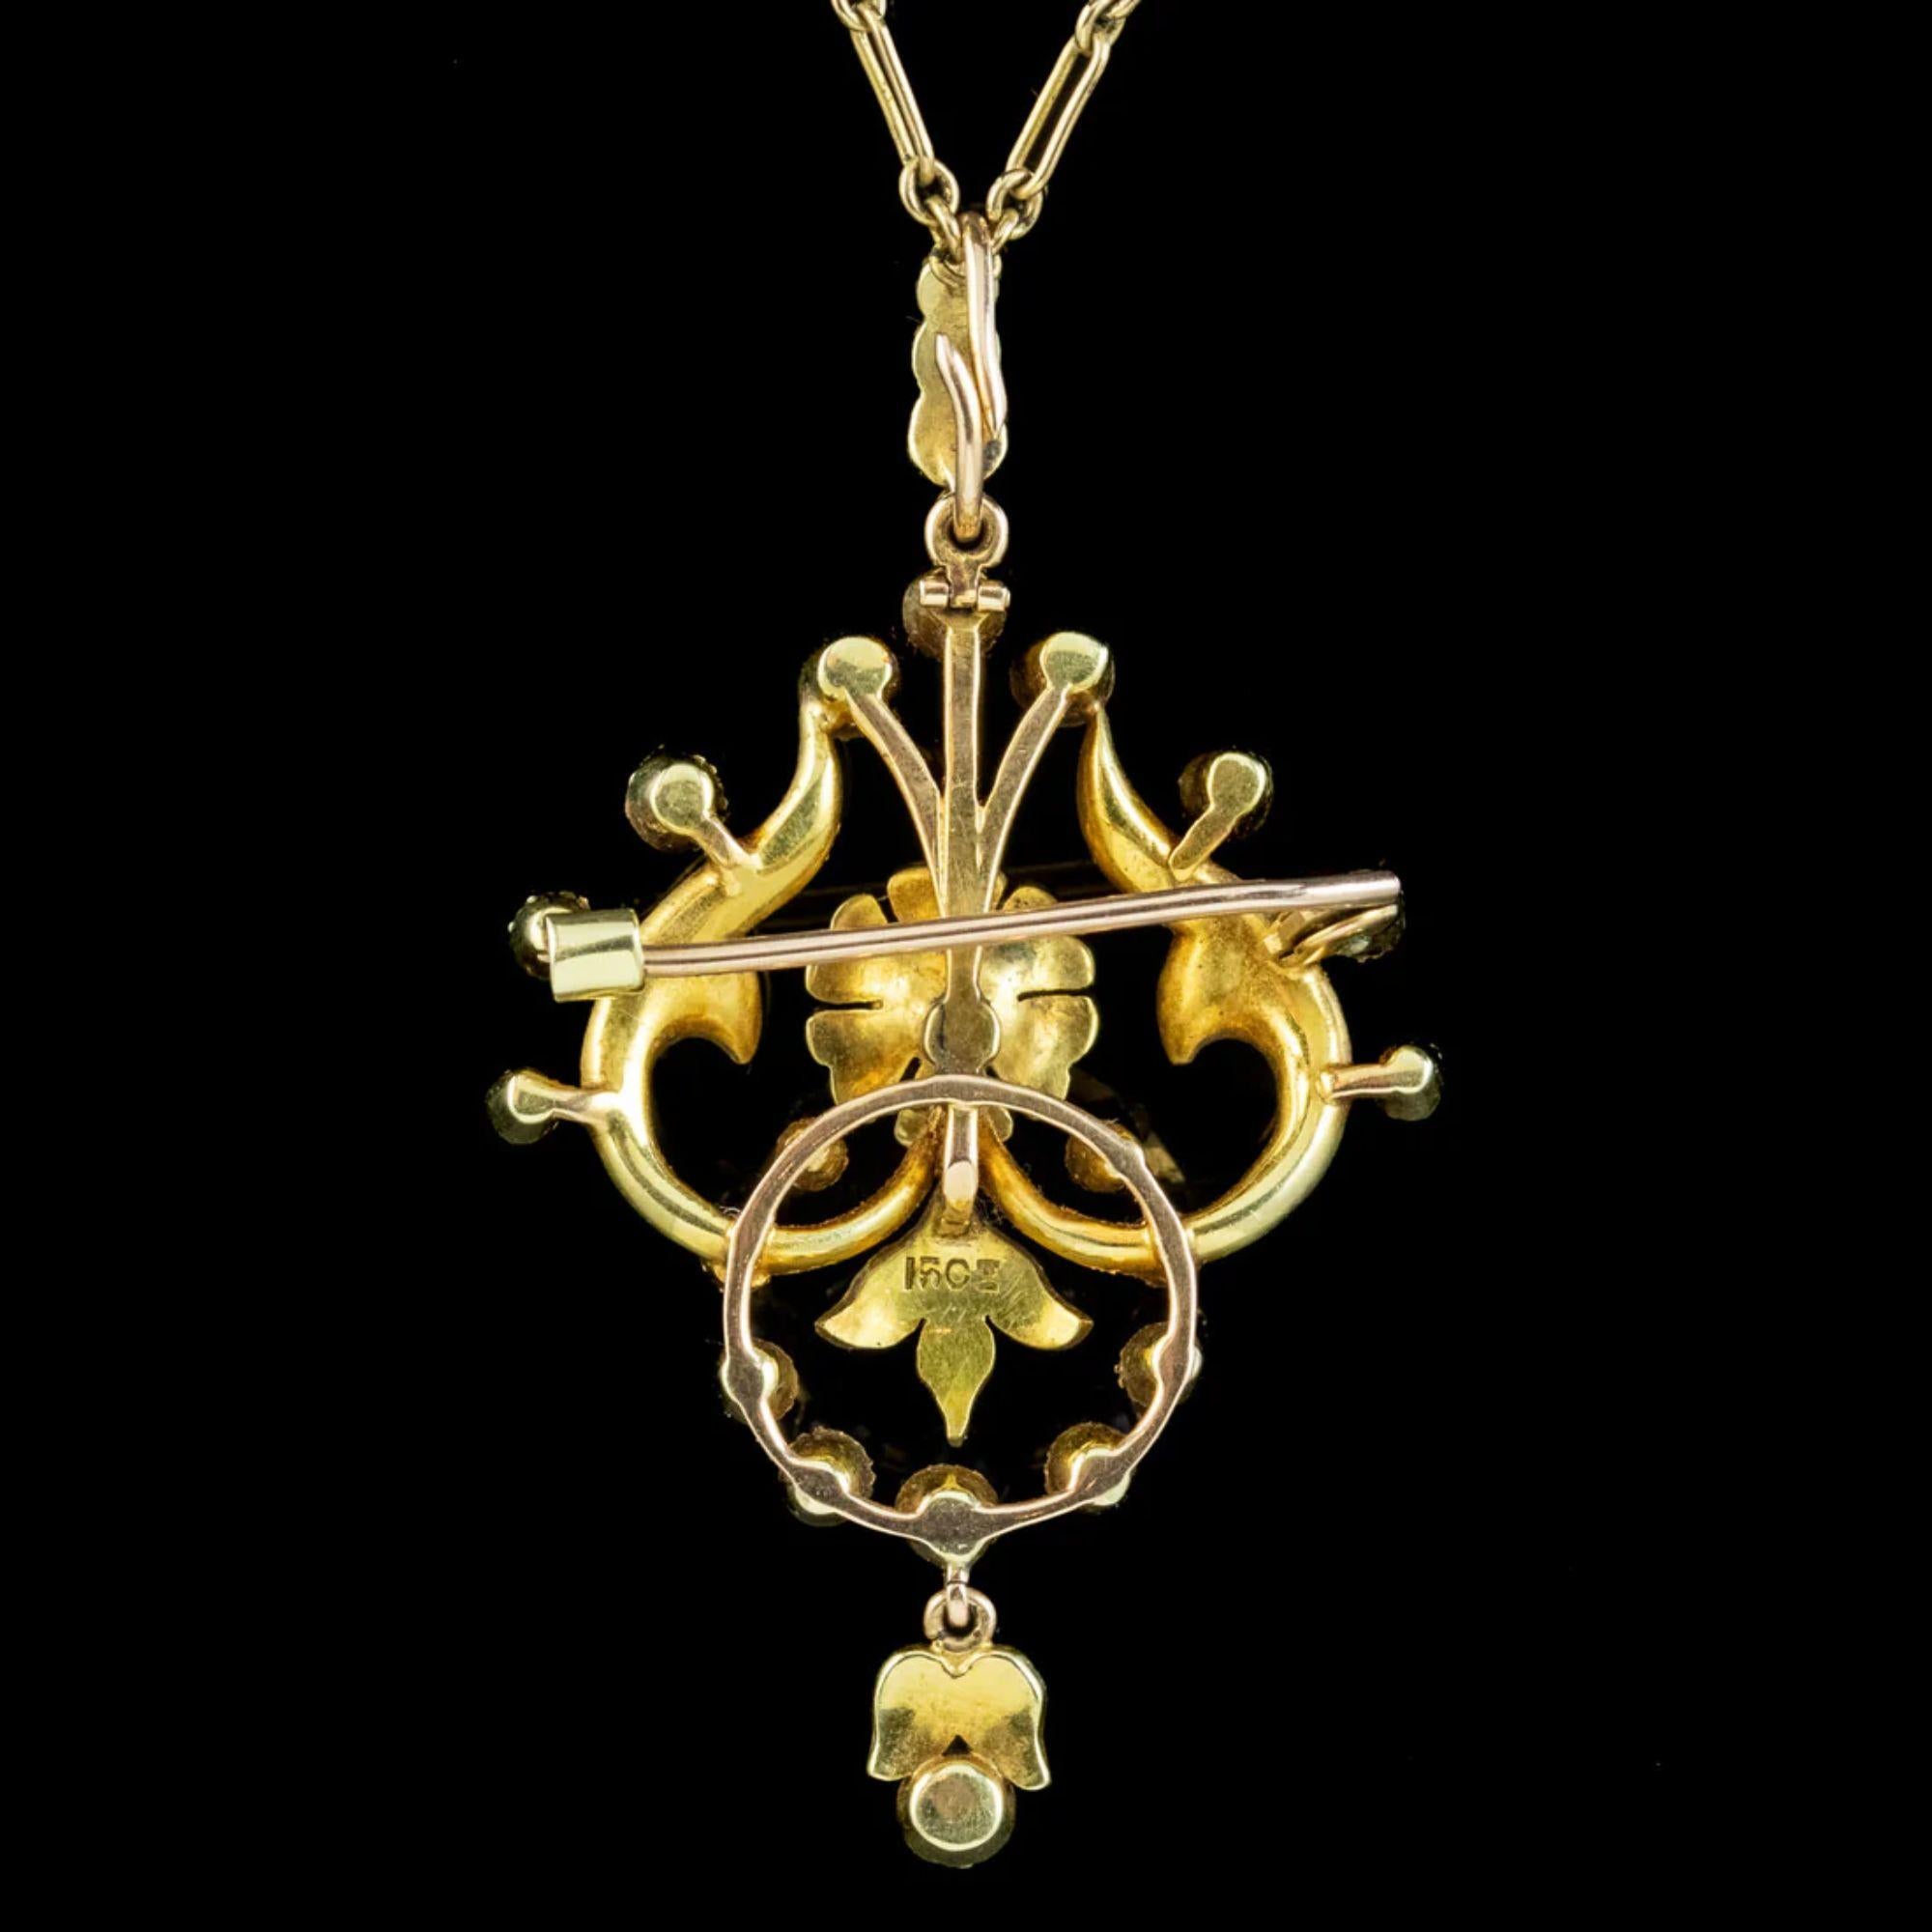 Bead Antique Edwardian Pearl Pendant Necklace in 15ct Gold, circa 1901-1915 For Sale